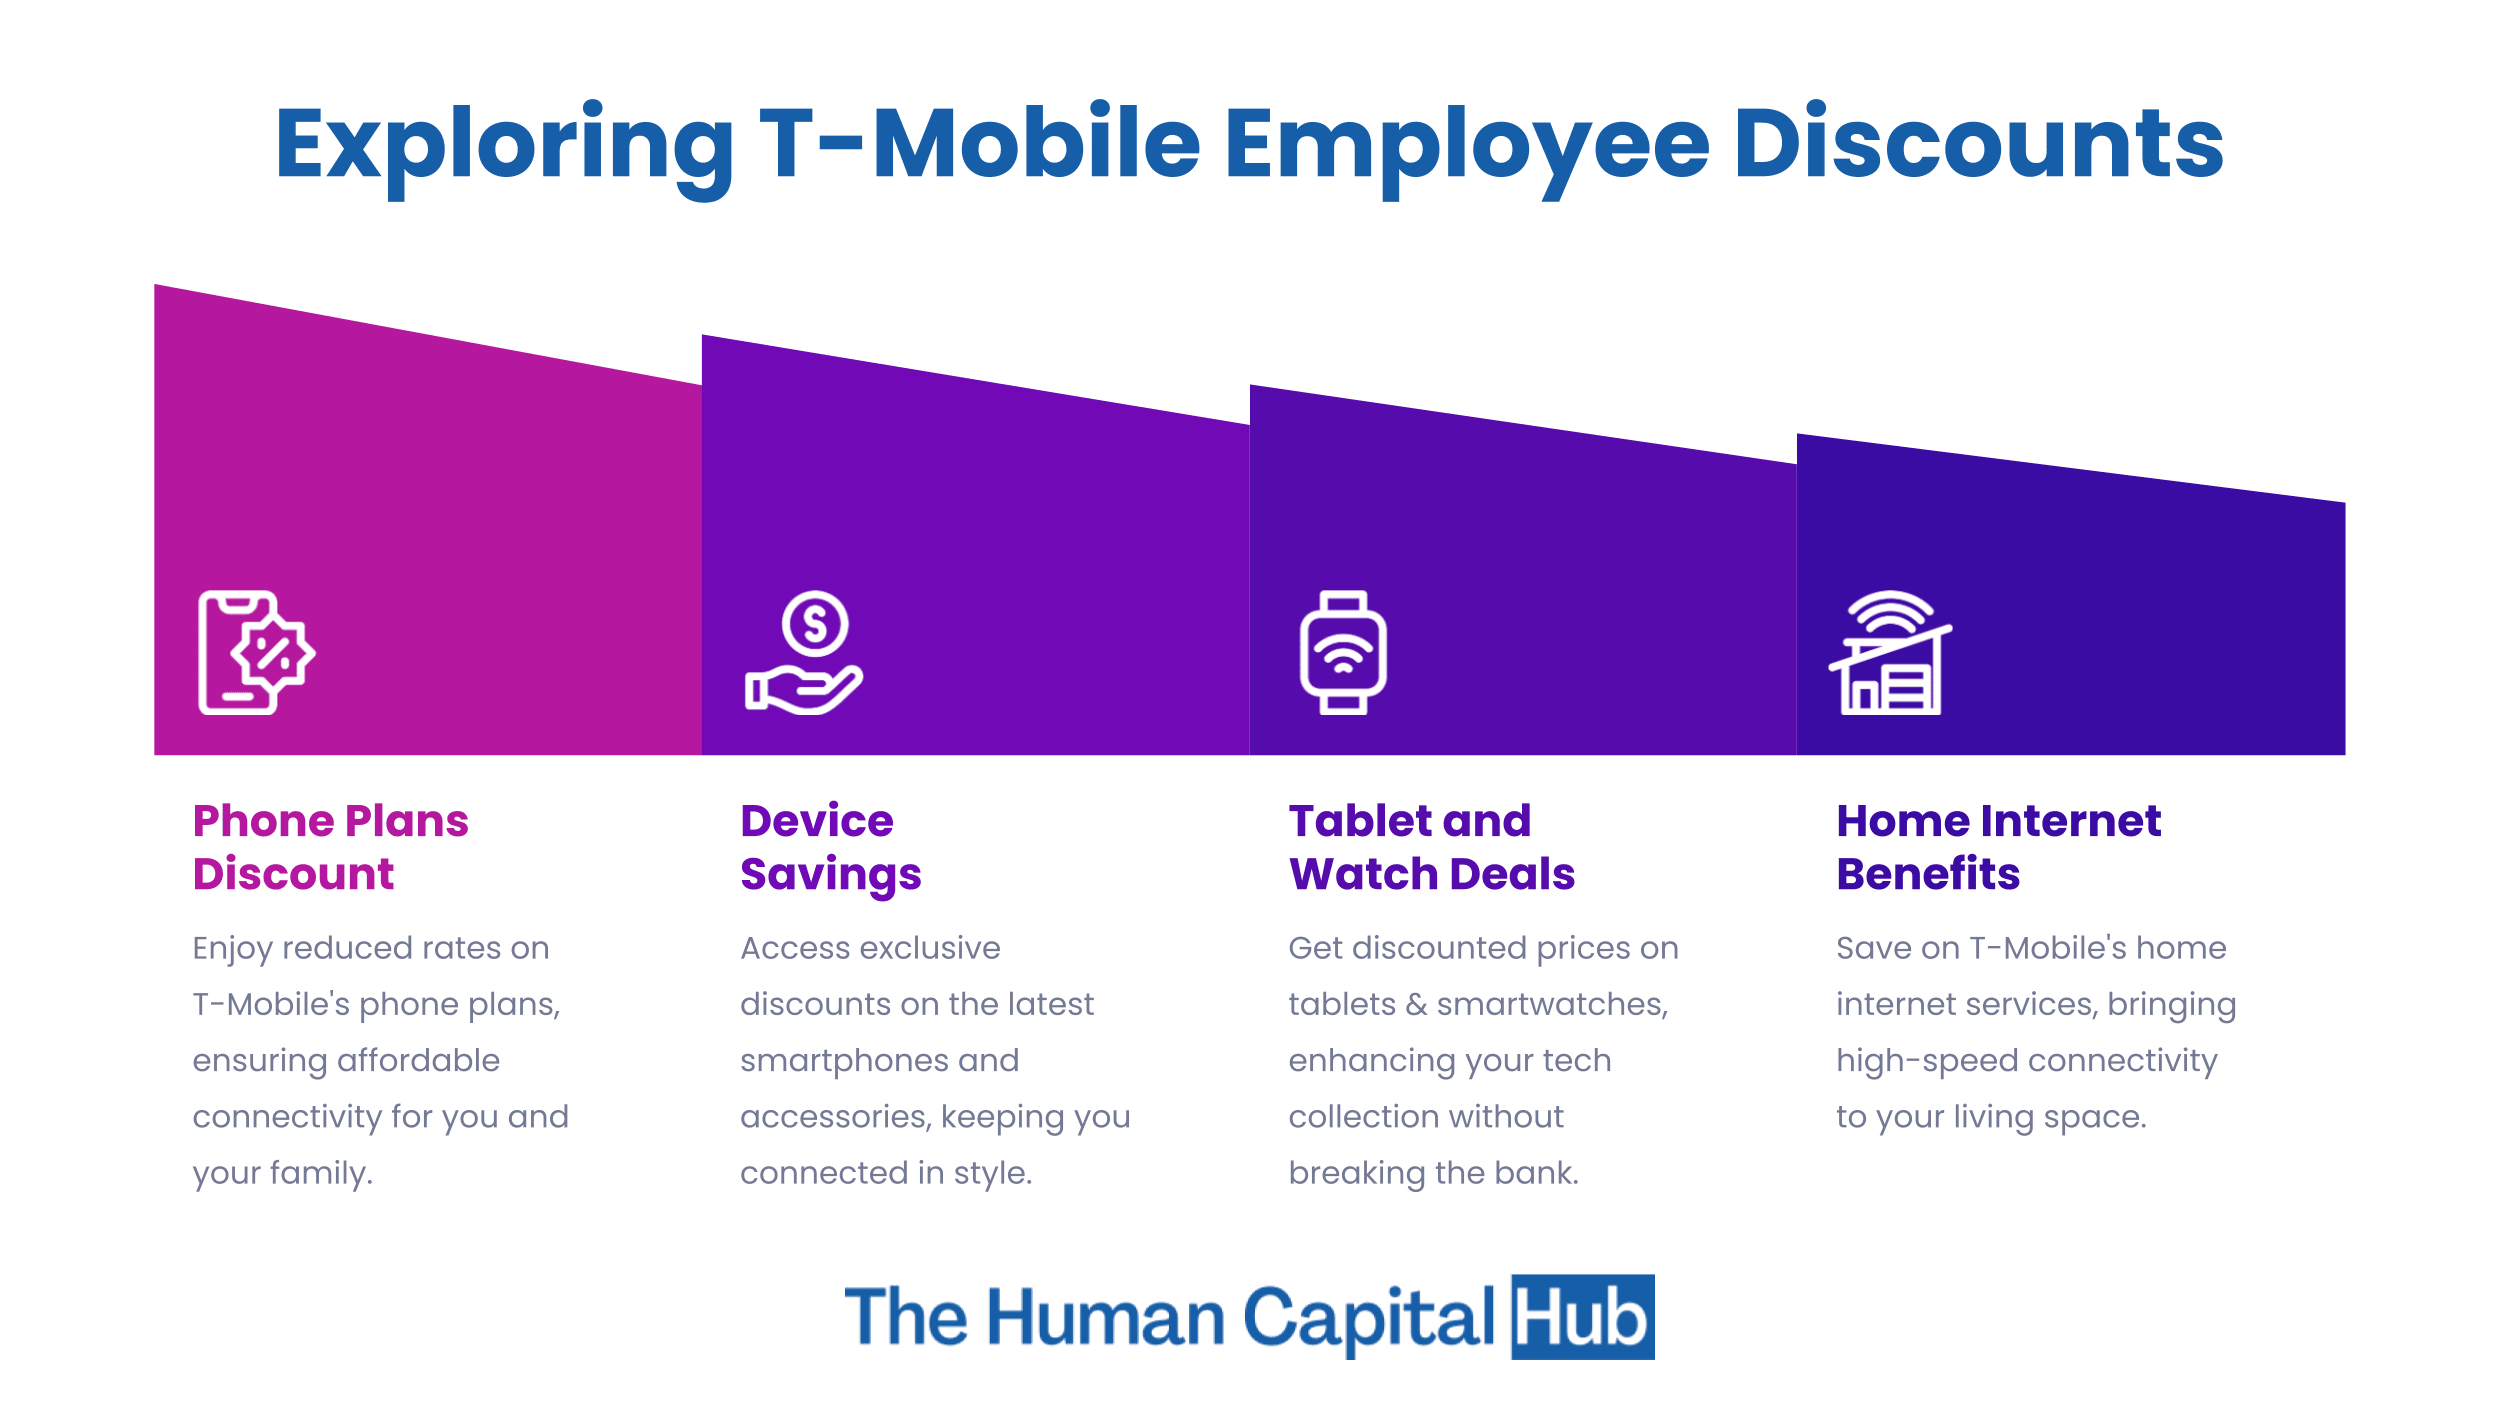 Employee Discounts T-Mobile: What you Need to Know